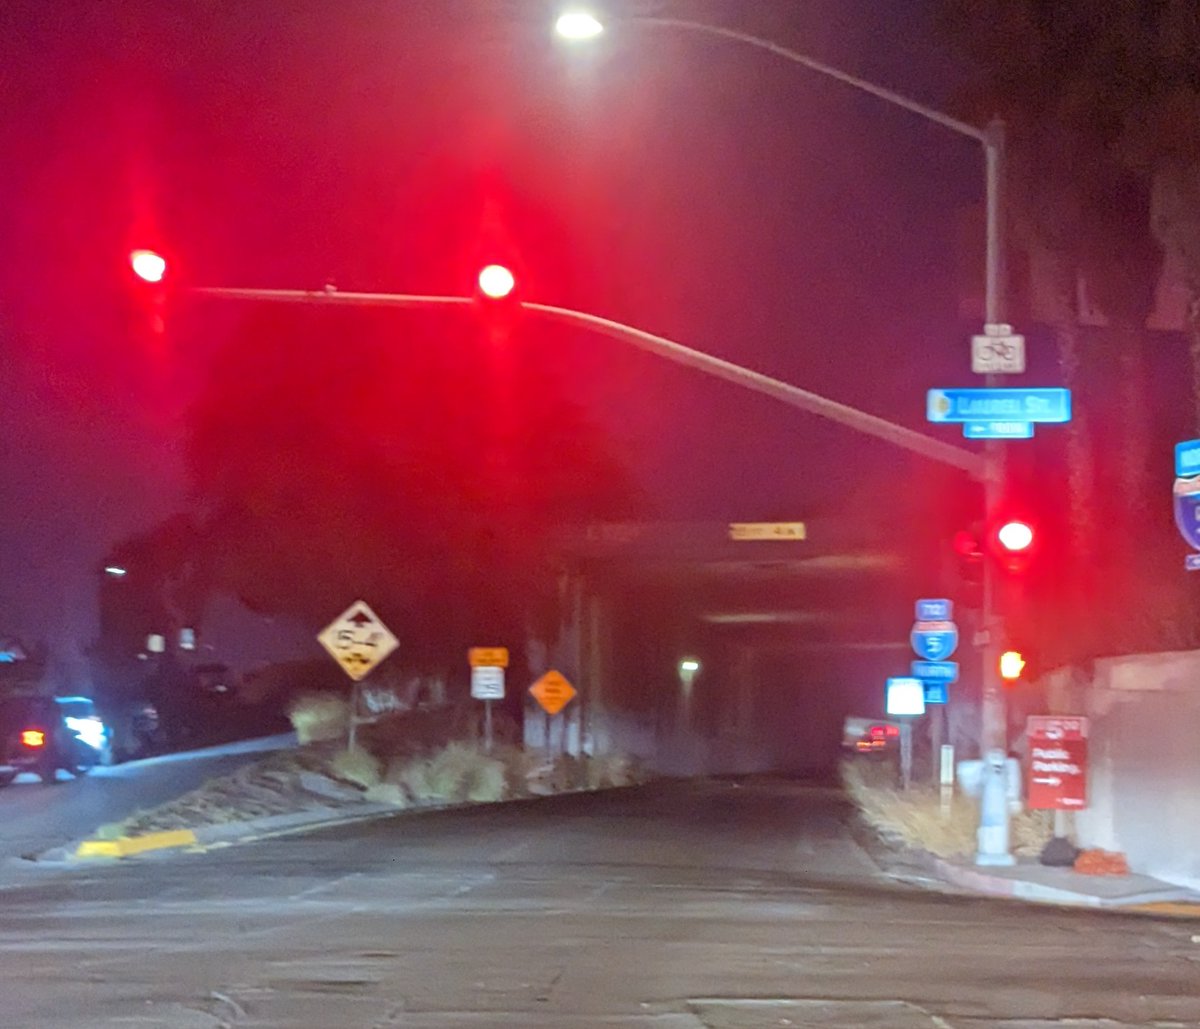 Worst part of turning the clock back is commuting in the dark now and this #indiastreet tunnel with lights out for over a year and not even #flexposts for the #bikelane that vanishes. @CityofSanDiego #VisionZero #bikesandiego